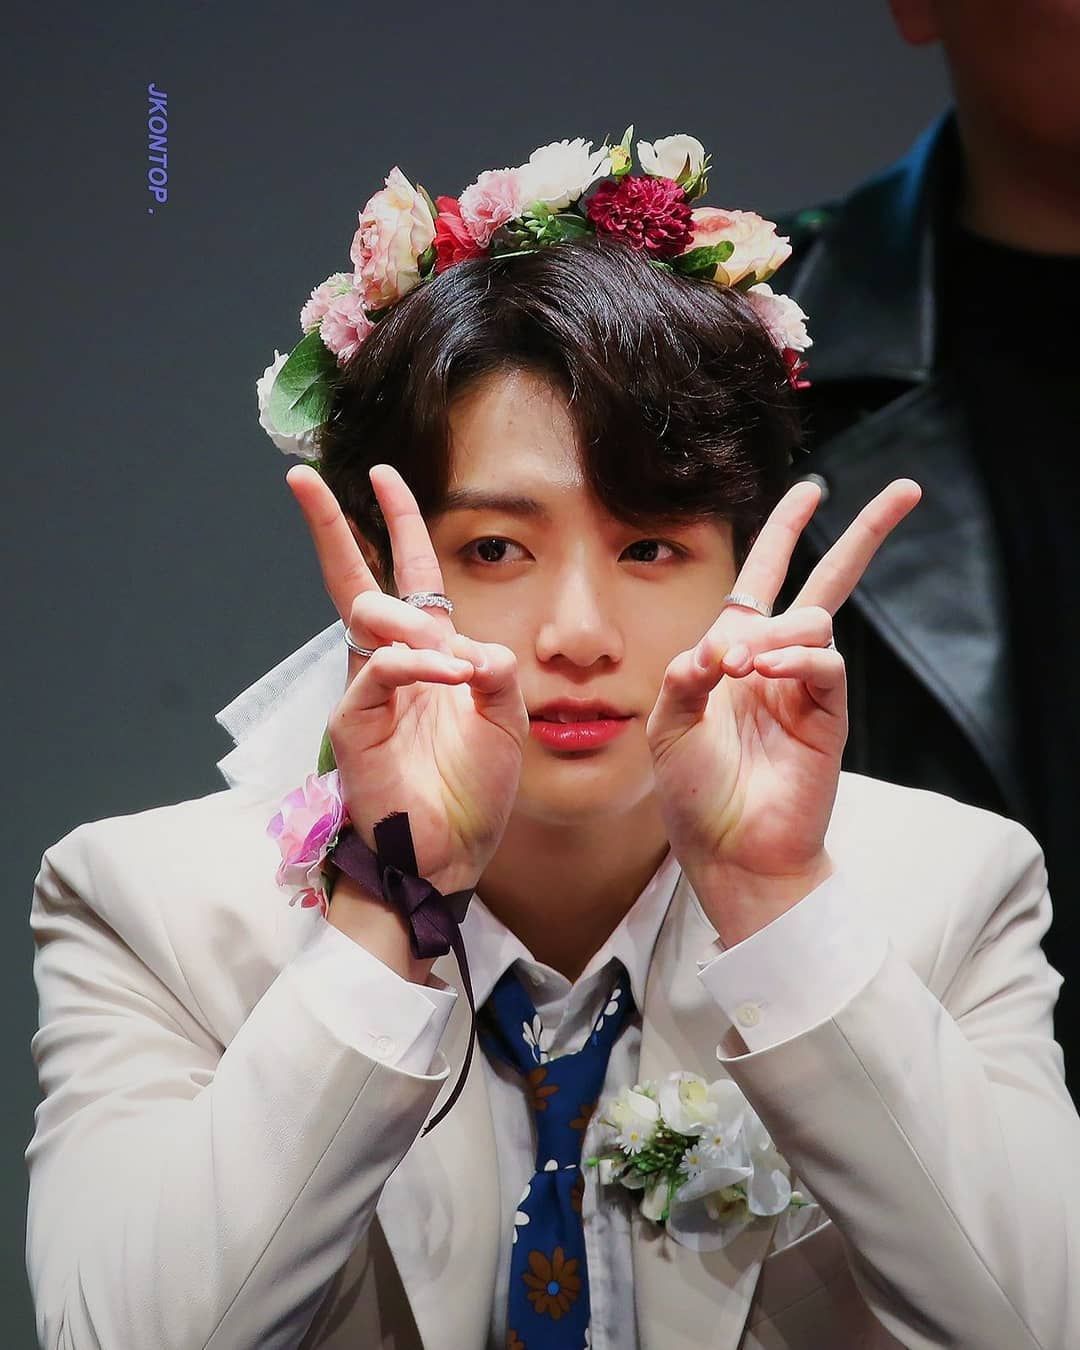 awe the flower crown, he is so pretty goodnight Visit site for more photo. Jungkook, Bts jungkook, Crown aesthetic